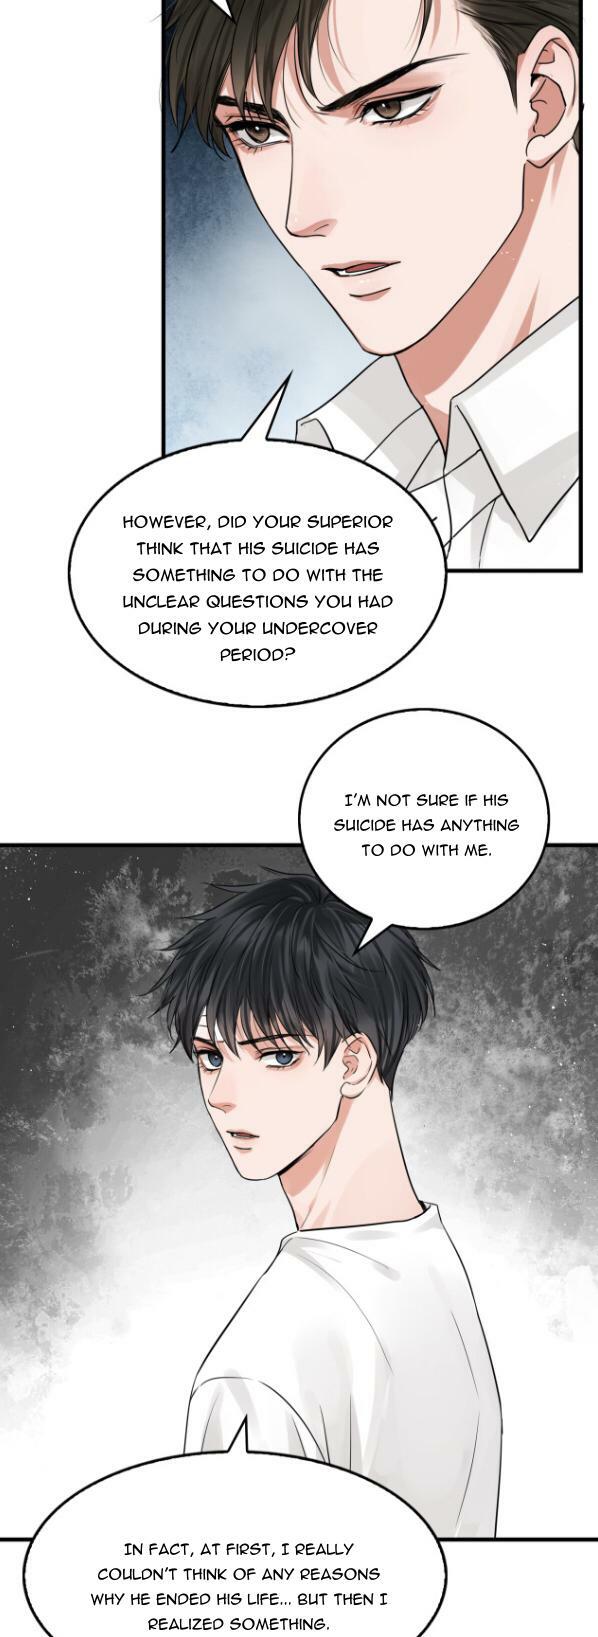 Breaking Through The Clouds 2: Swallow The Sea Chapter 26 page 11 - Mangakakalot